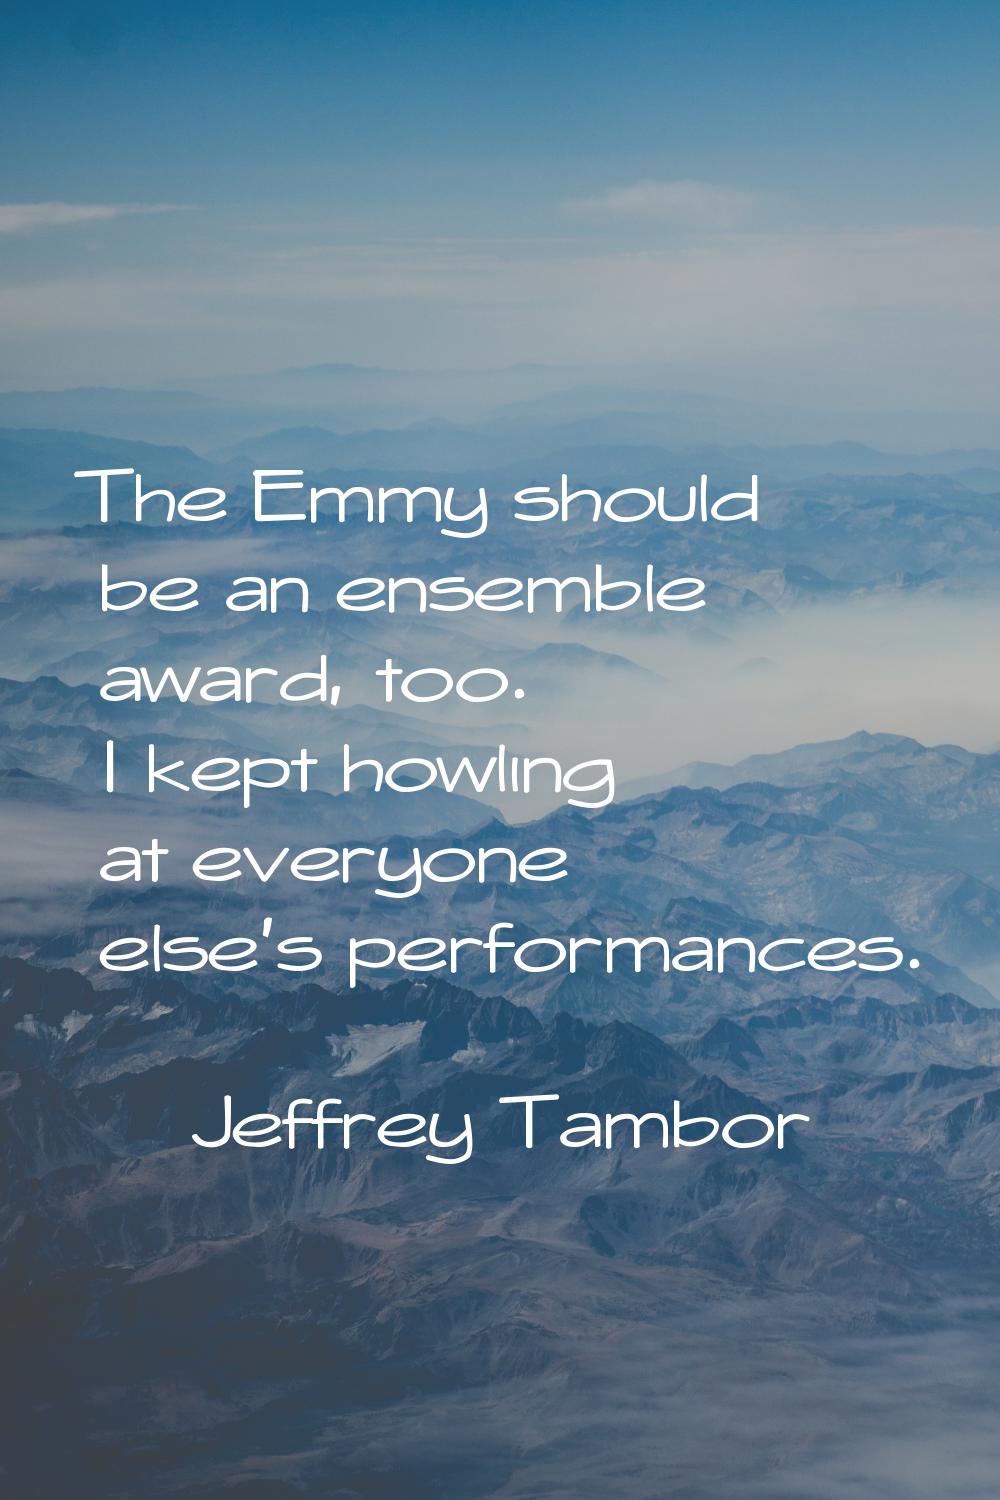 The Emmy should be an ensemble award, too. I kept howling at everyone else's performances.